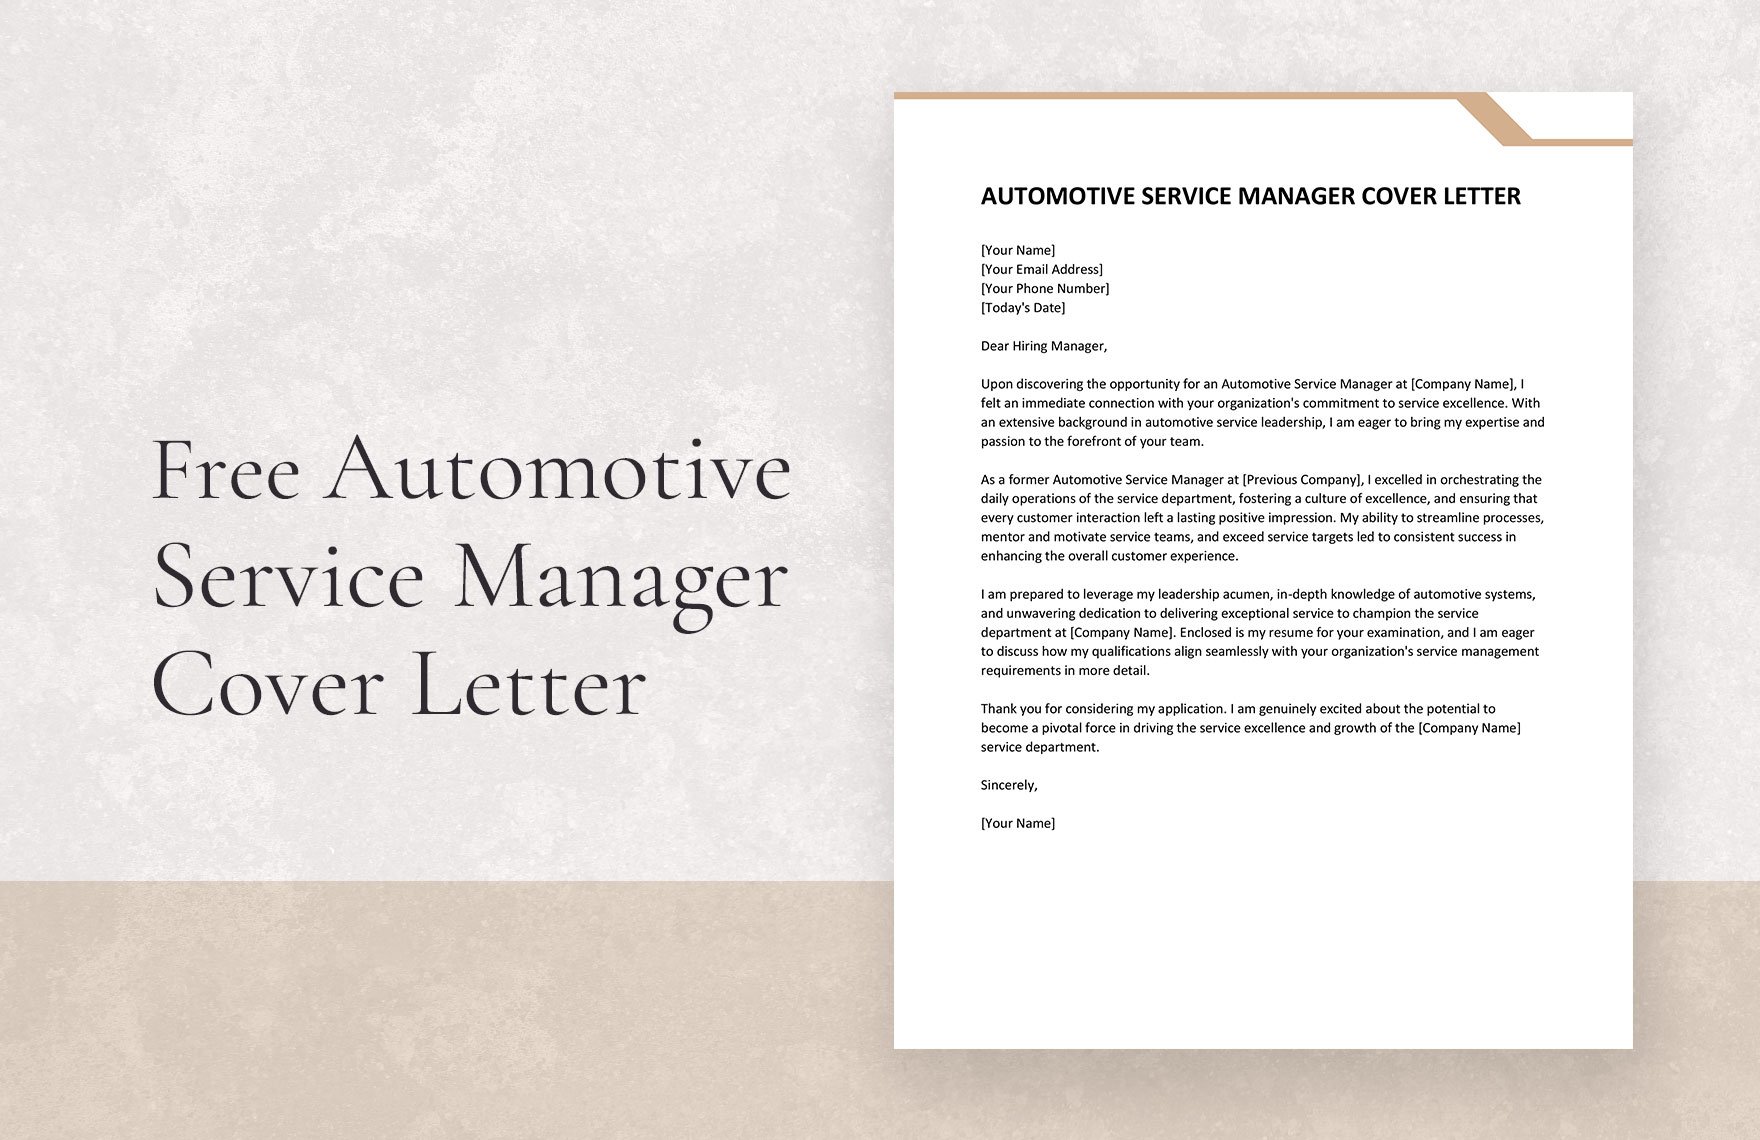 Automotive Service Manager Cover Letter